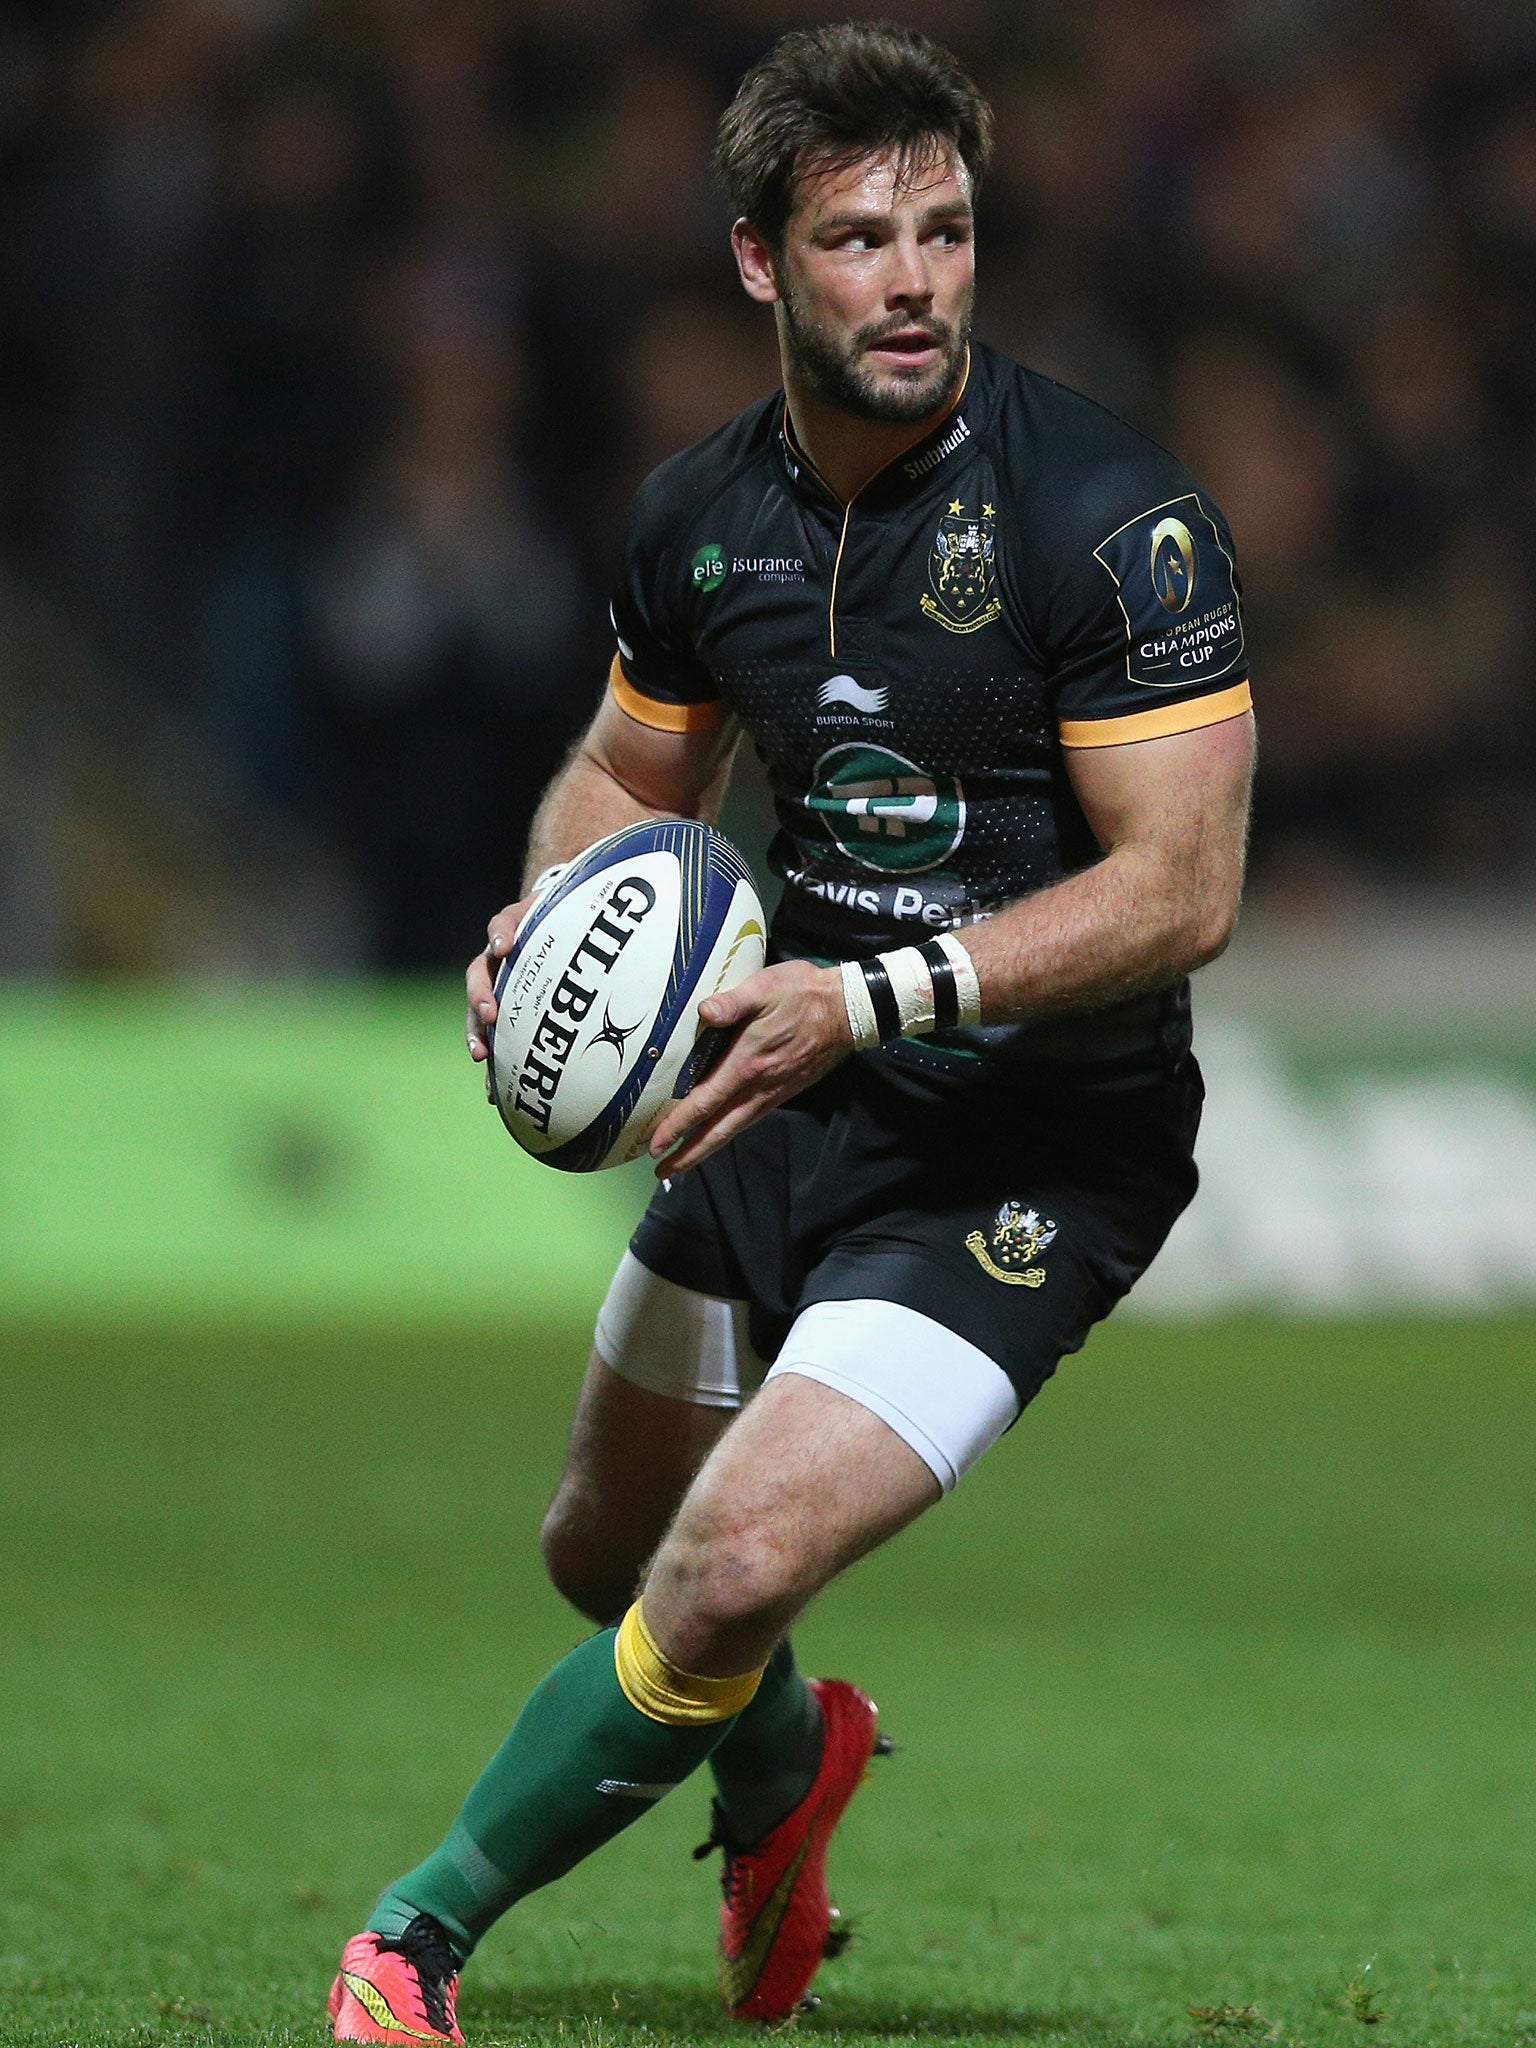 Ben Foden is one of those called into the England camp